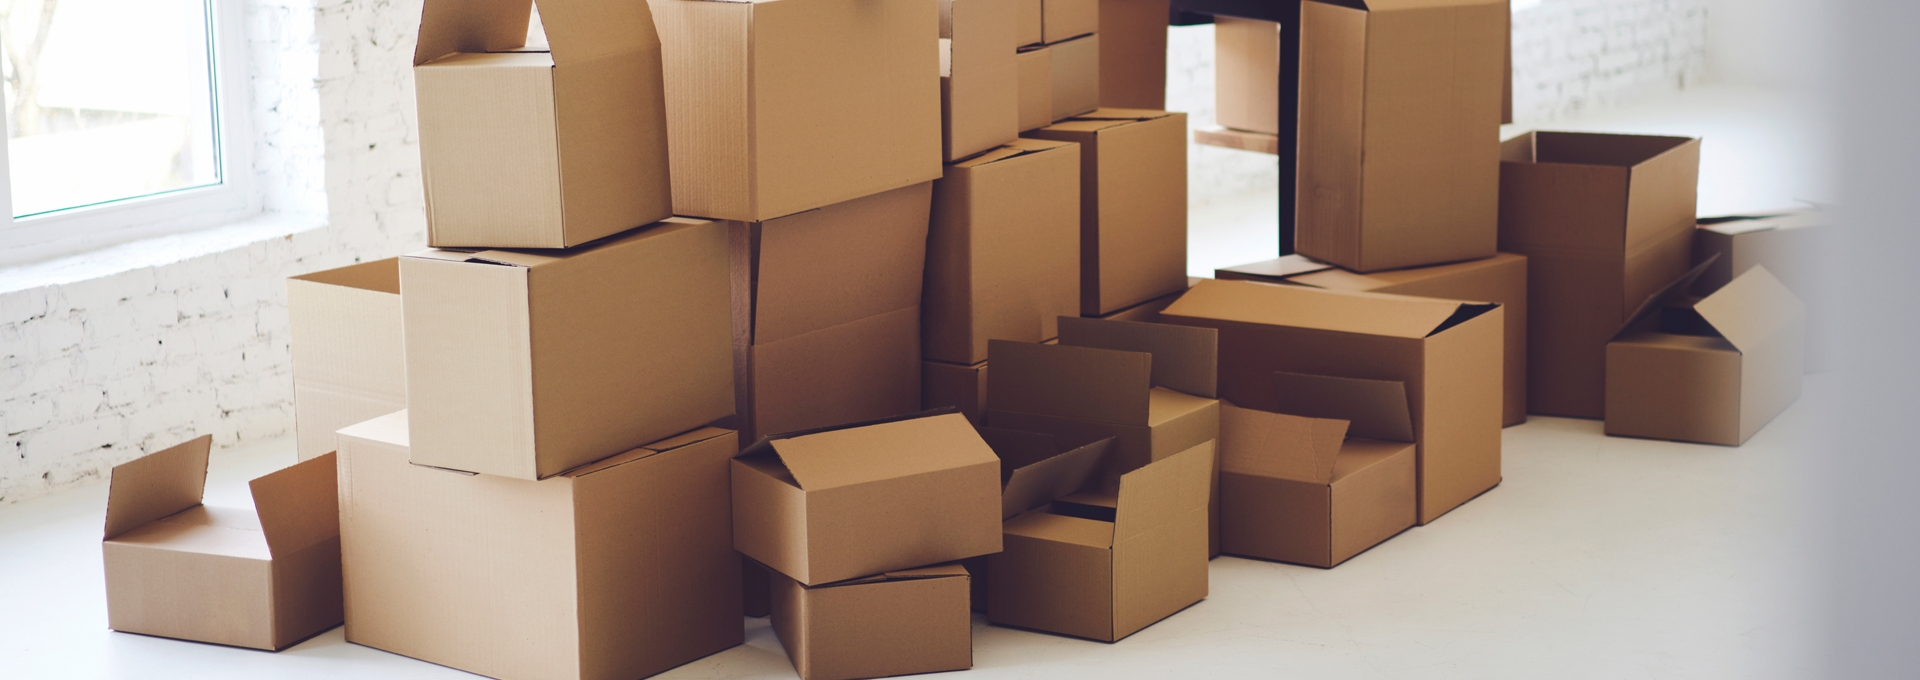 San Diego Moving and Storage Services